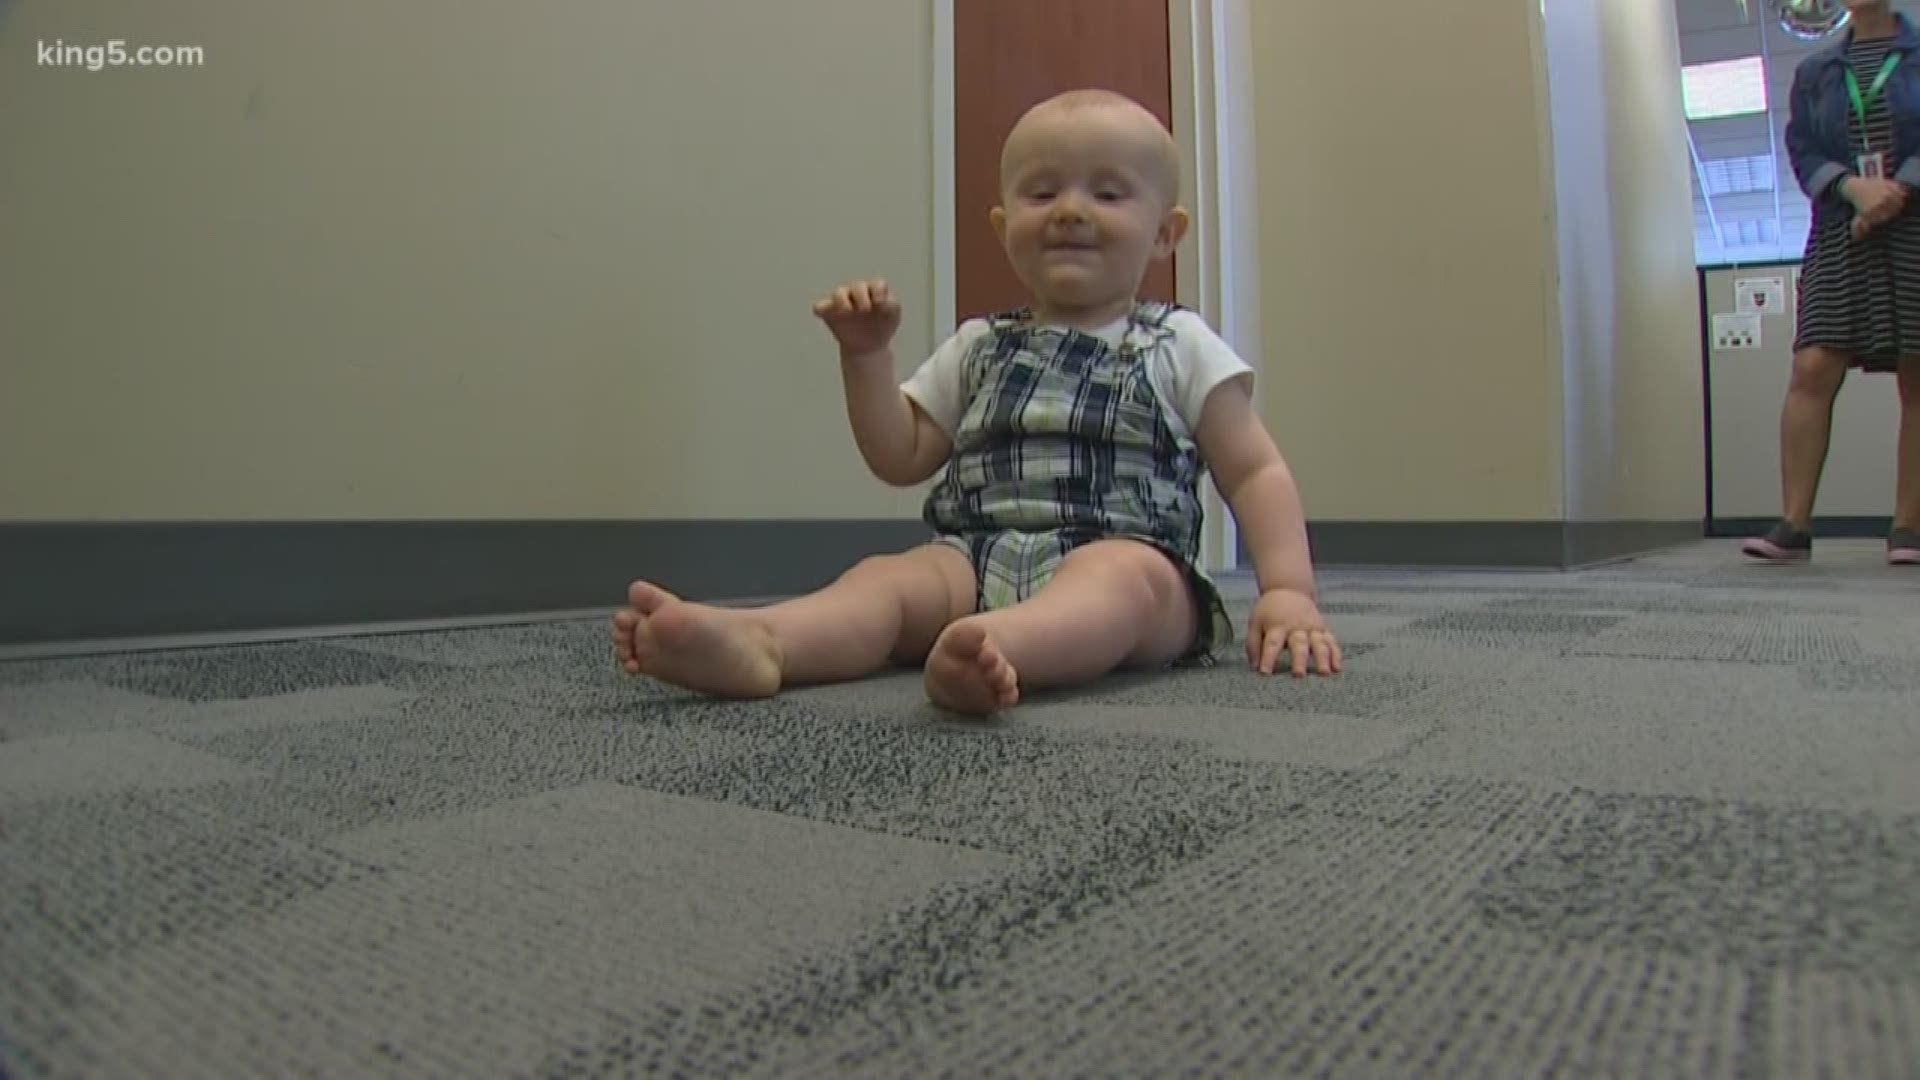 More Washington state employees - and babies - are participating in the "Infant to Work" program with successful results. KING 5's Drew Mikkelsen reports.